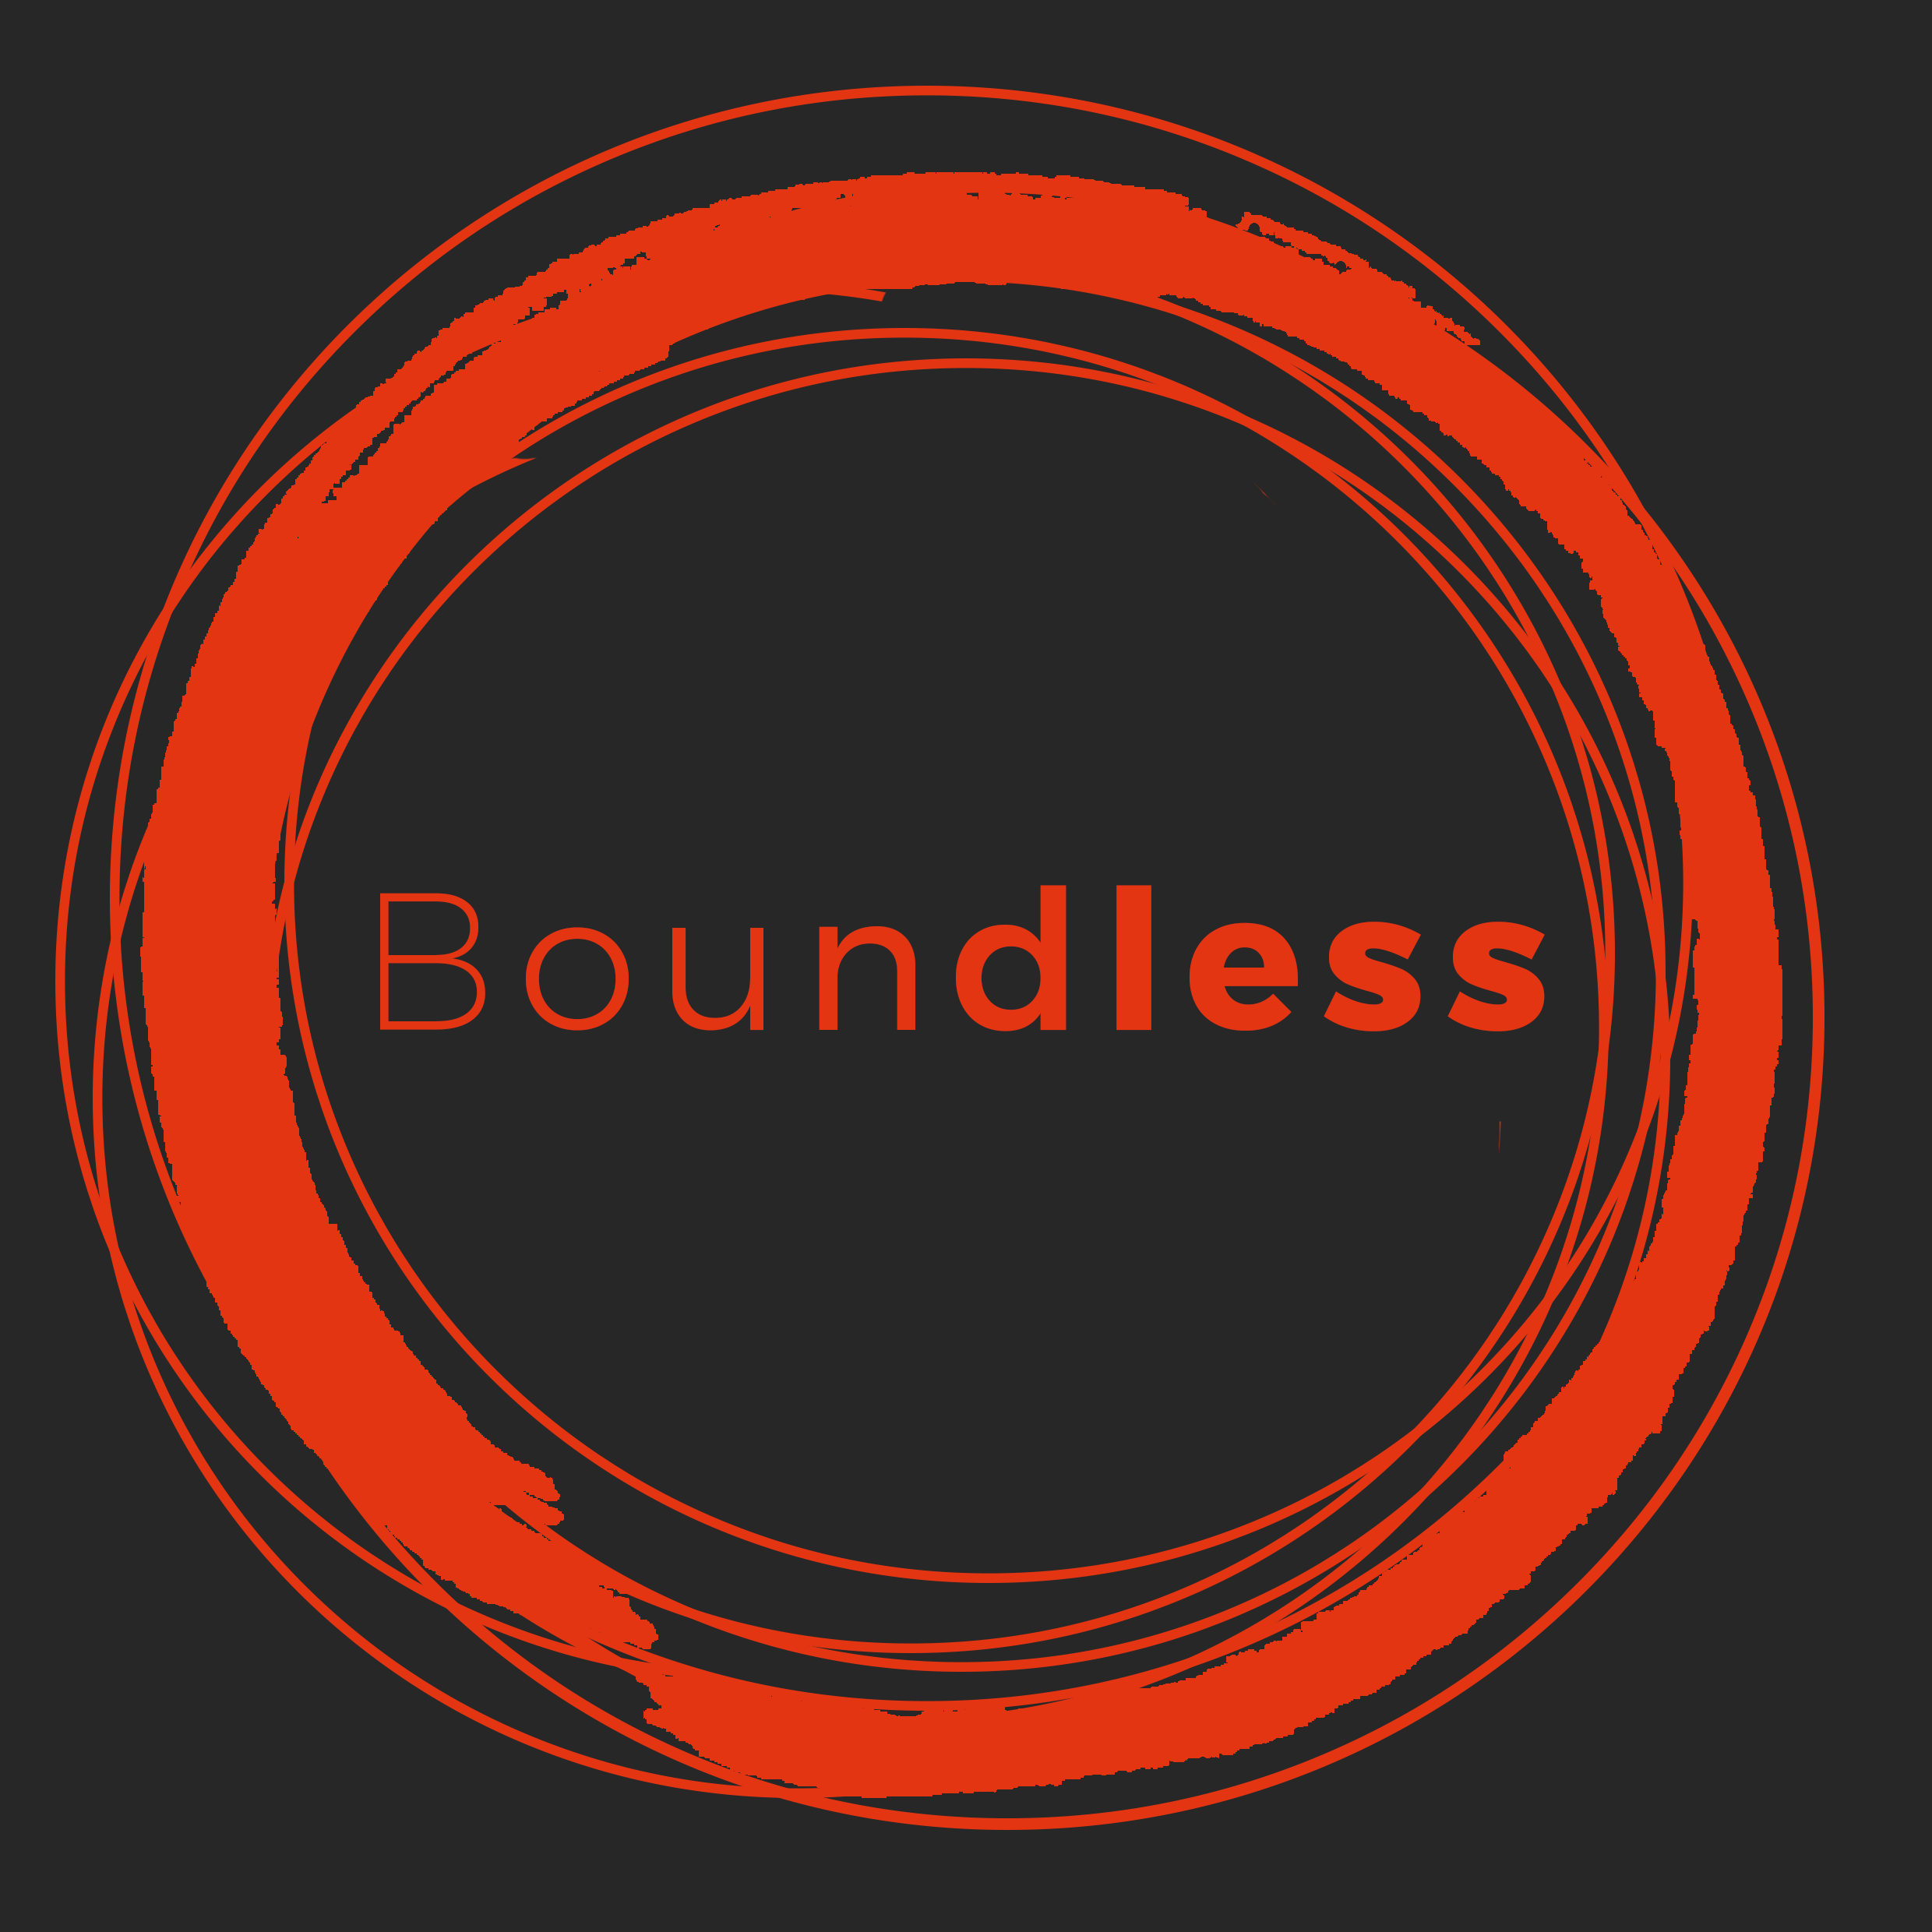 Boundless by Shilpi